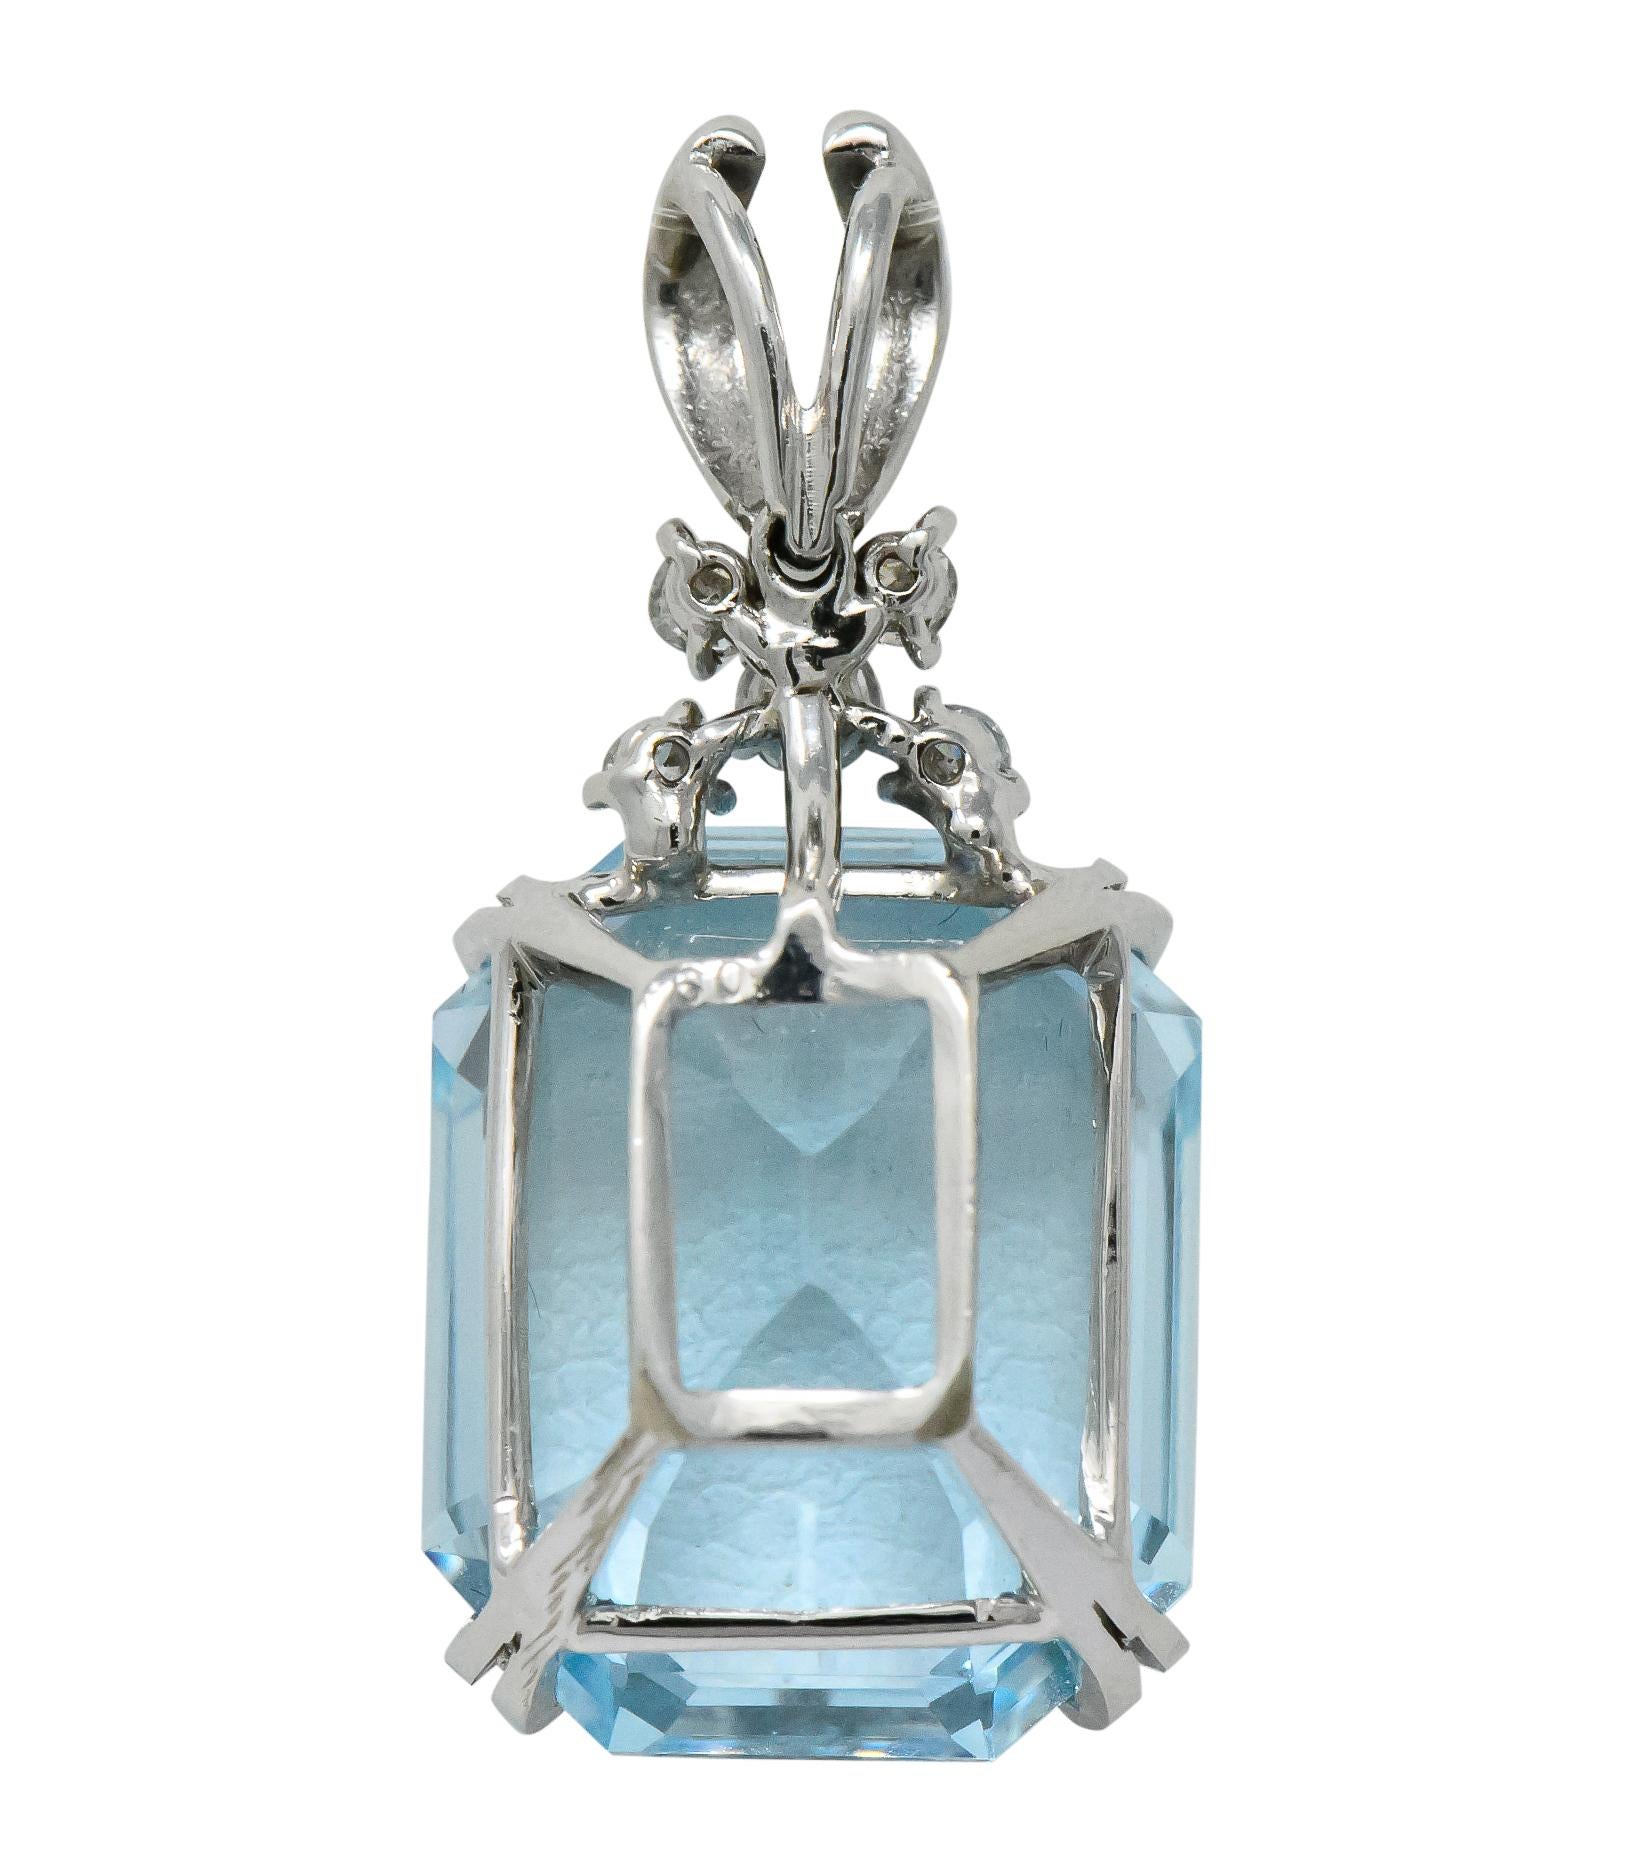 Featuring a transparent, light blue, rectangular step cut aquamarine weighing approximately 16.50 carats

Accented by five round brilliant cut diamonds weighing approximately 0.25 carat total, G/H color and VS clarity

16.75 CTW

Aquamarine is